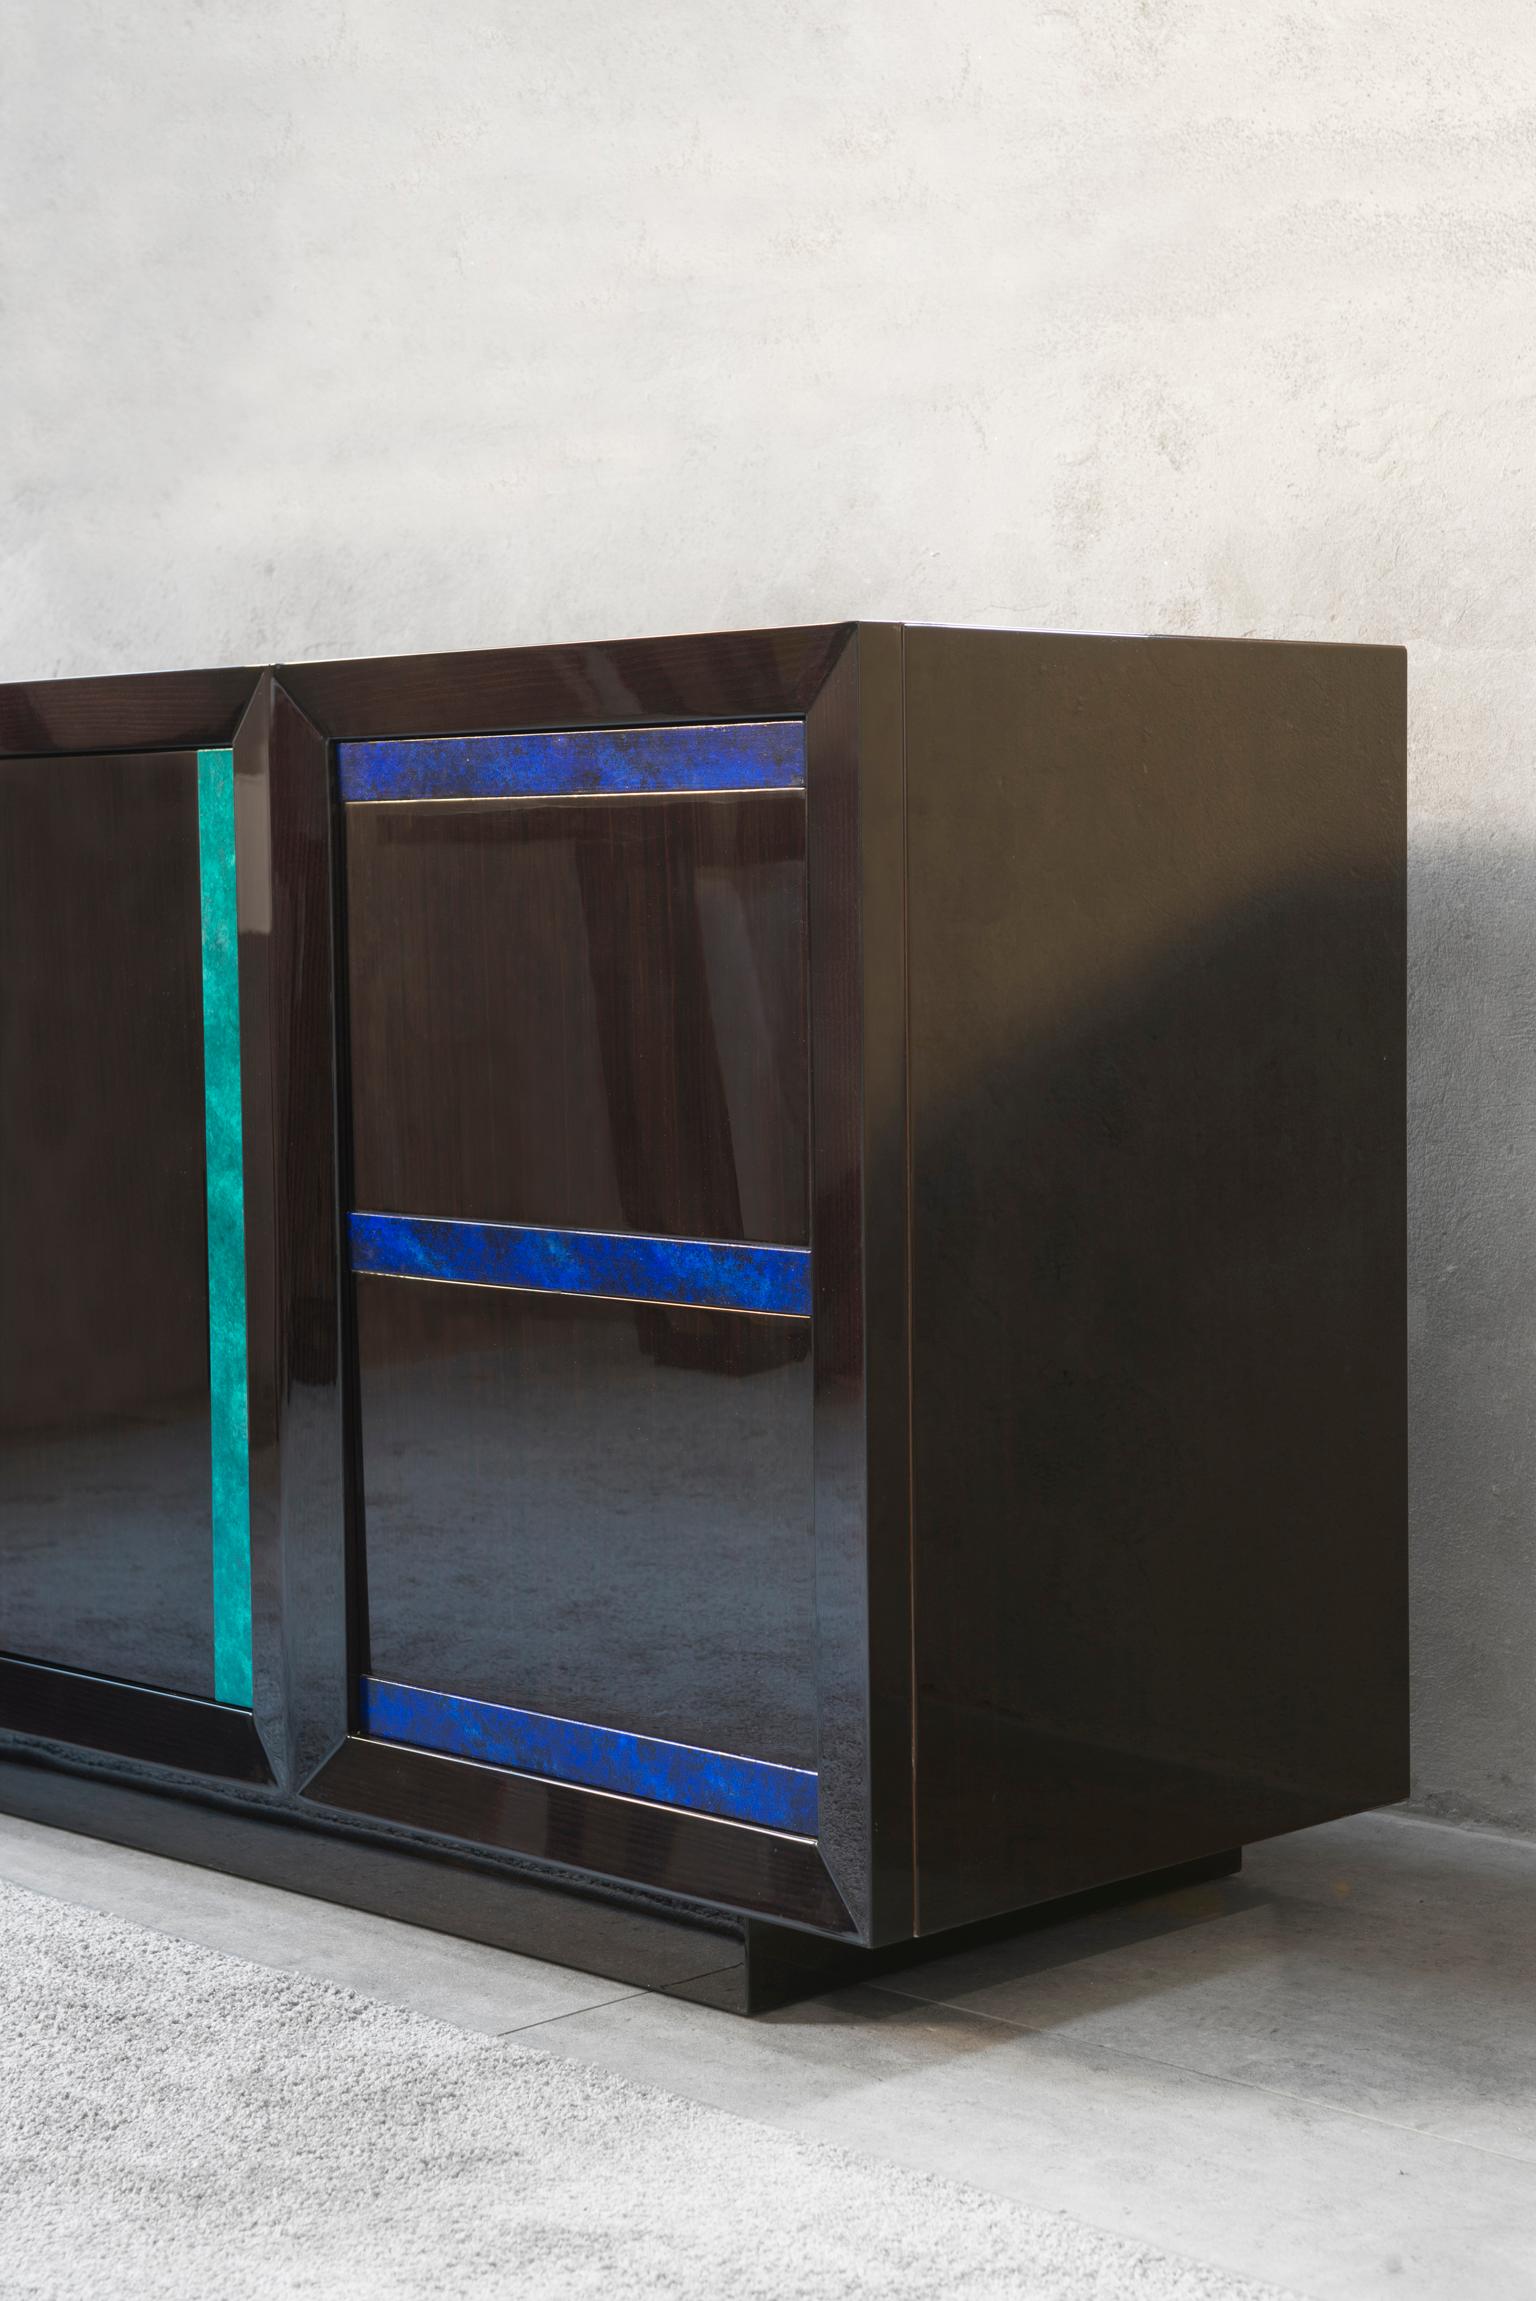 Isabella Costantini, Italy, Nine Sideboard W210 Plinth Base In New Condition For Sale In Ascoli Piceno, IT